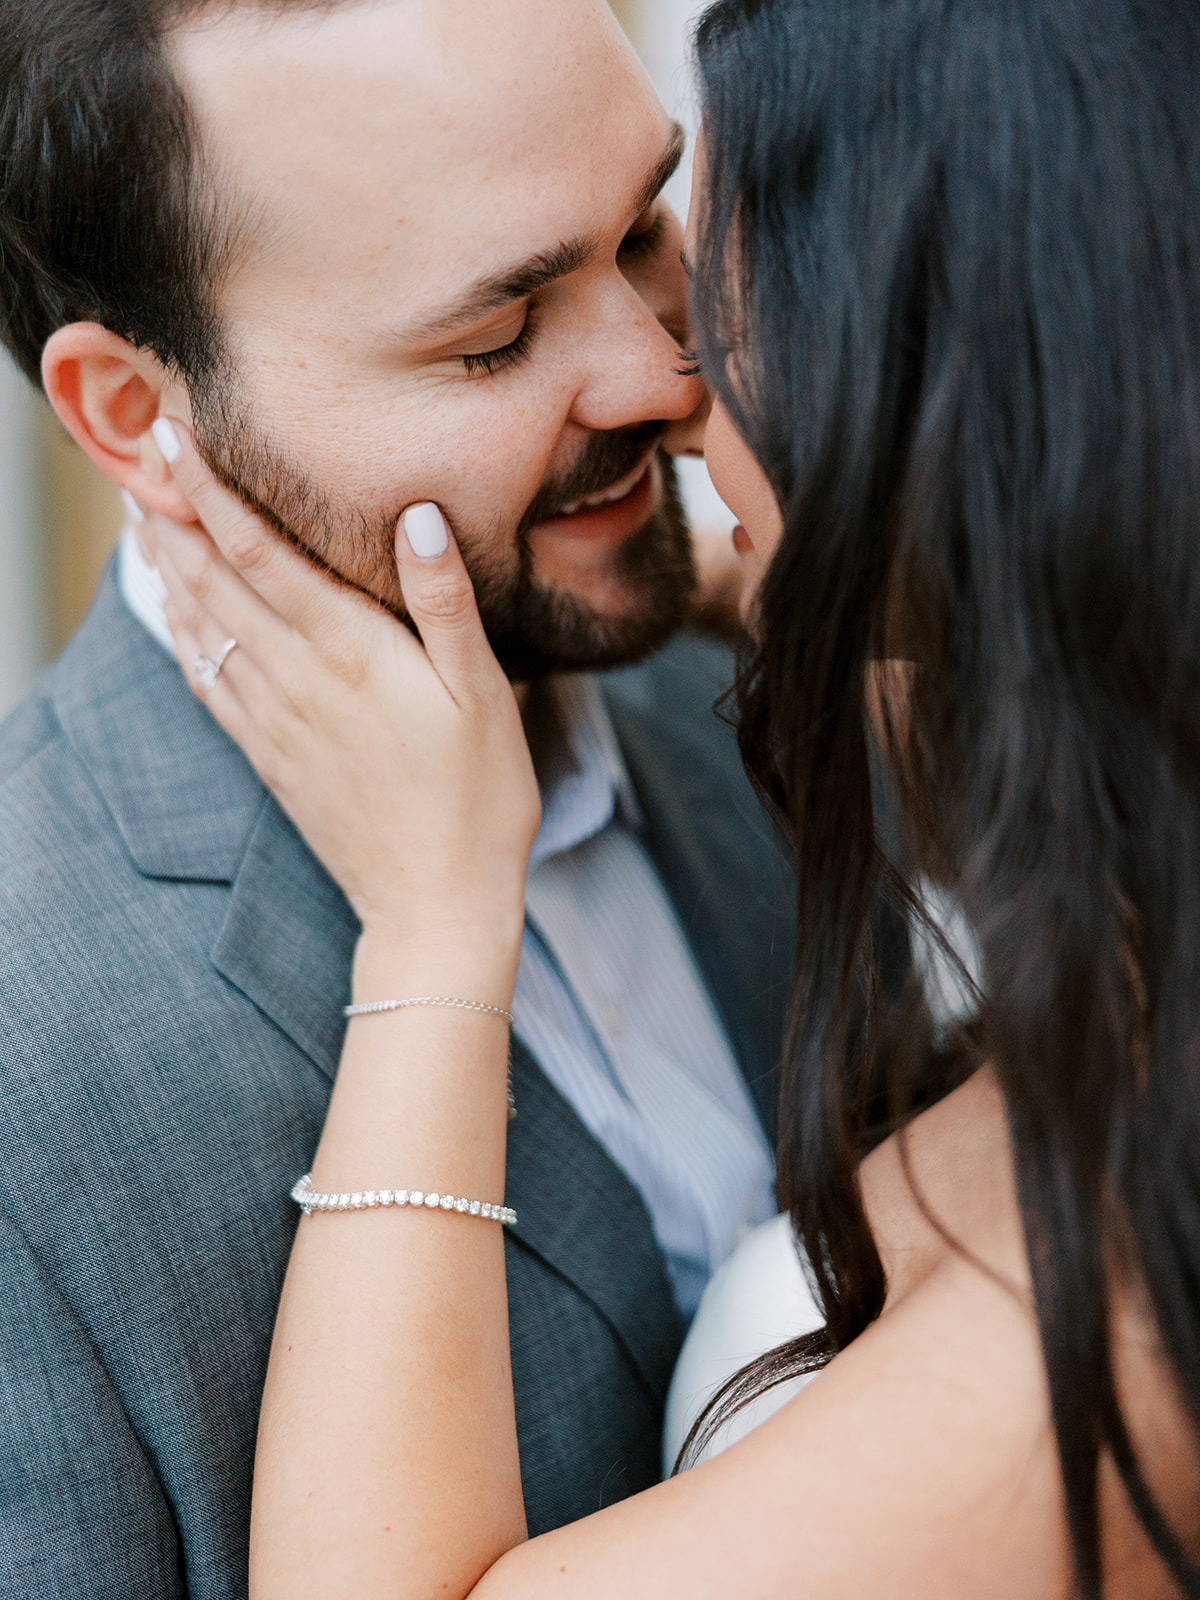 Fiance has hand on jaw as they lean in for a kiss